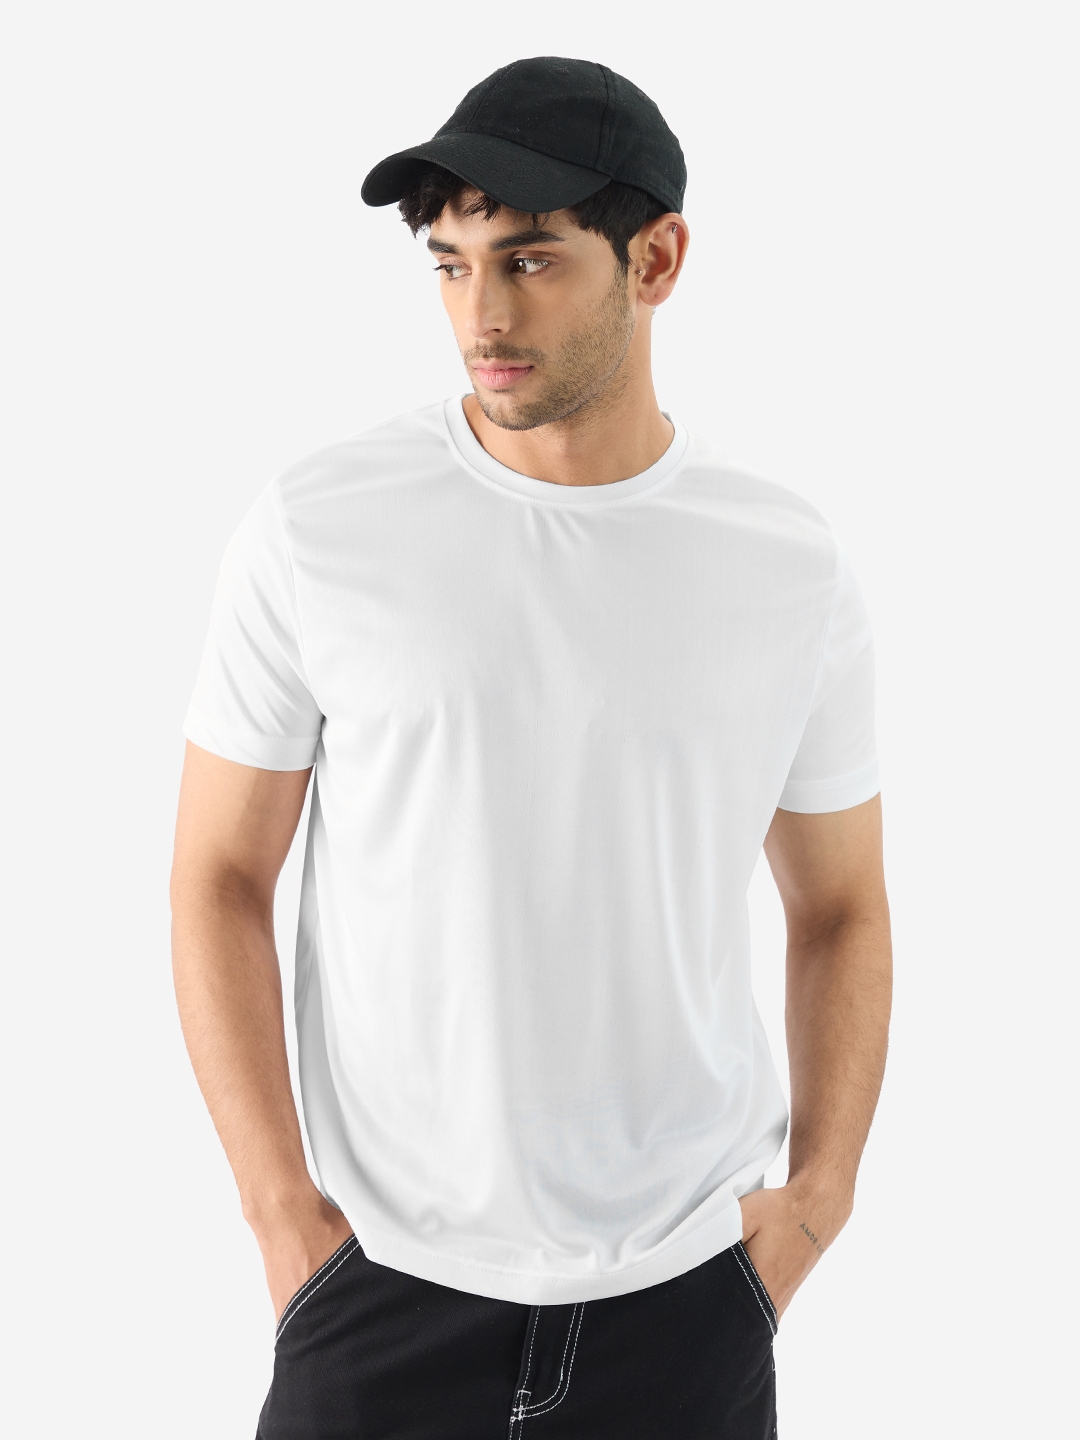 The Souled Store | Men's Solid: White Jerseys